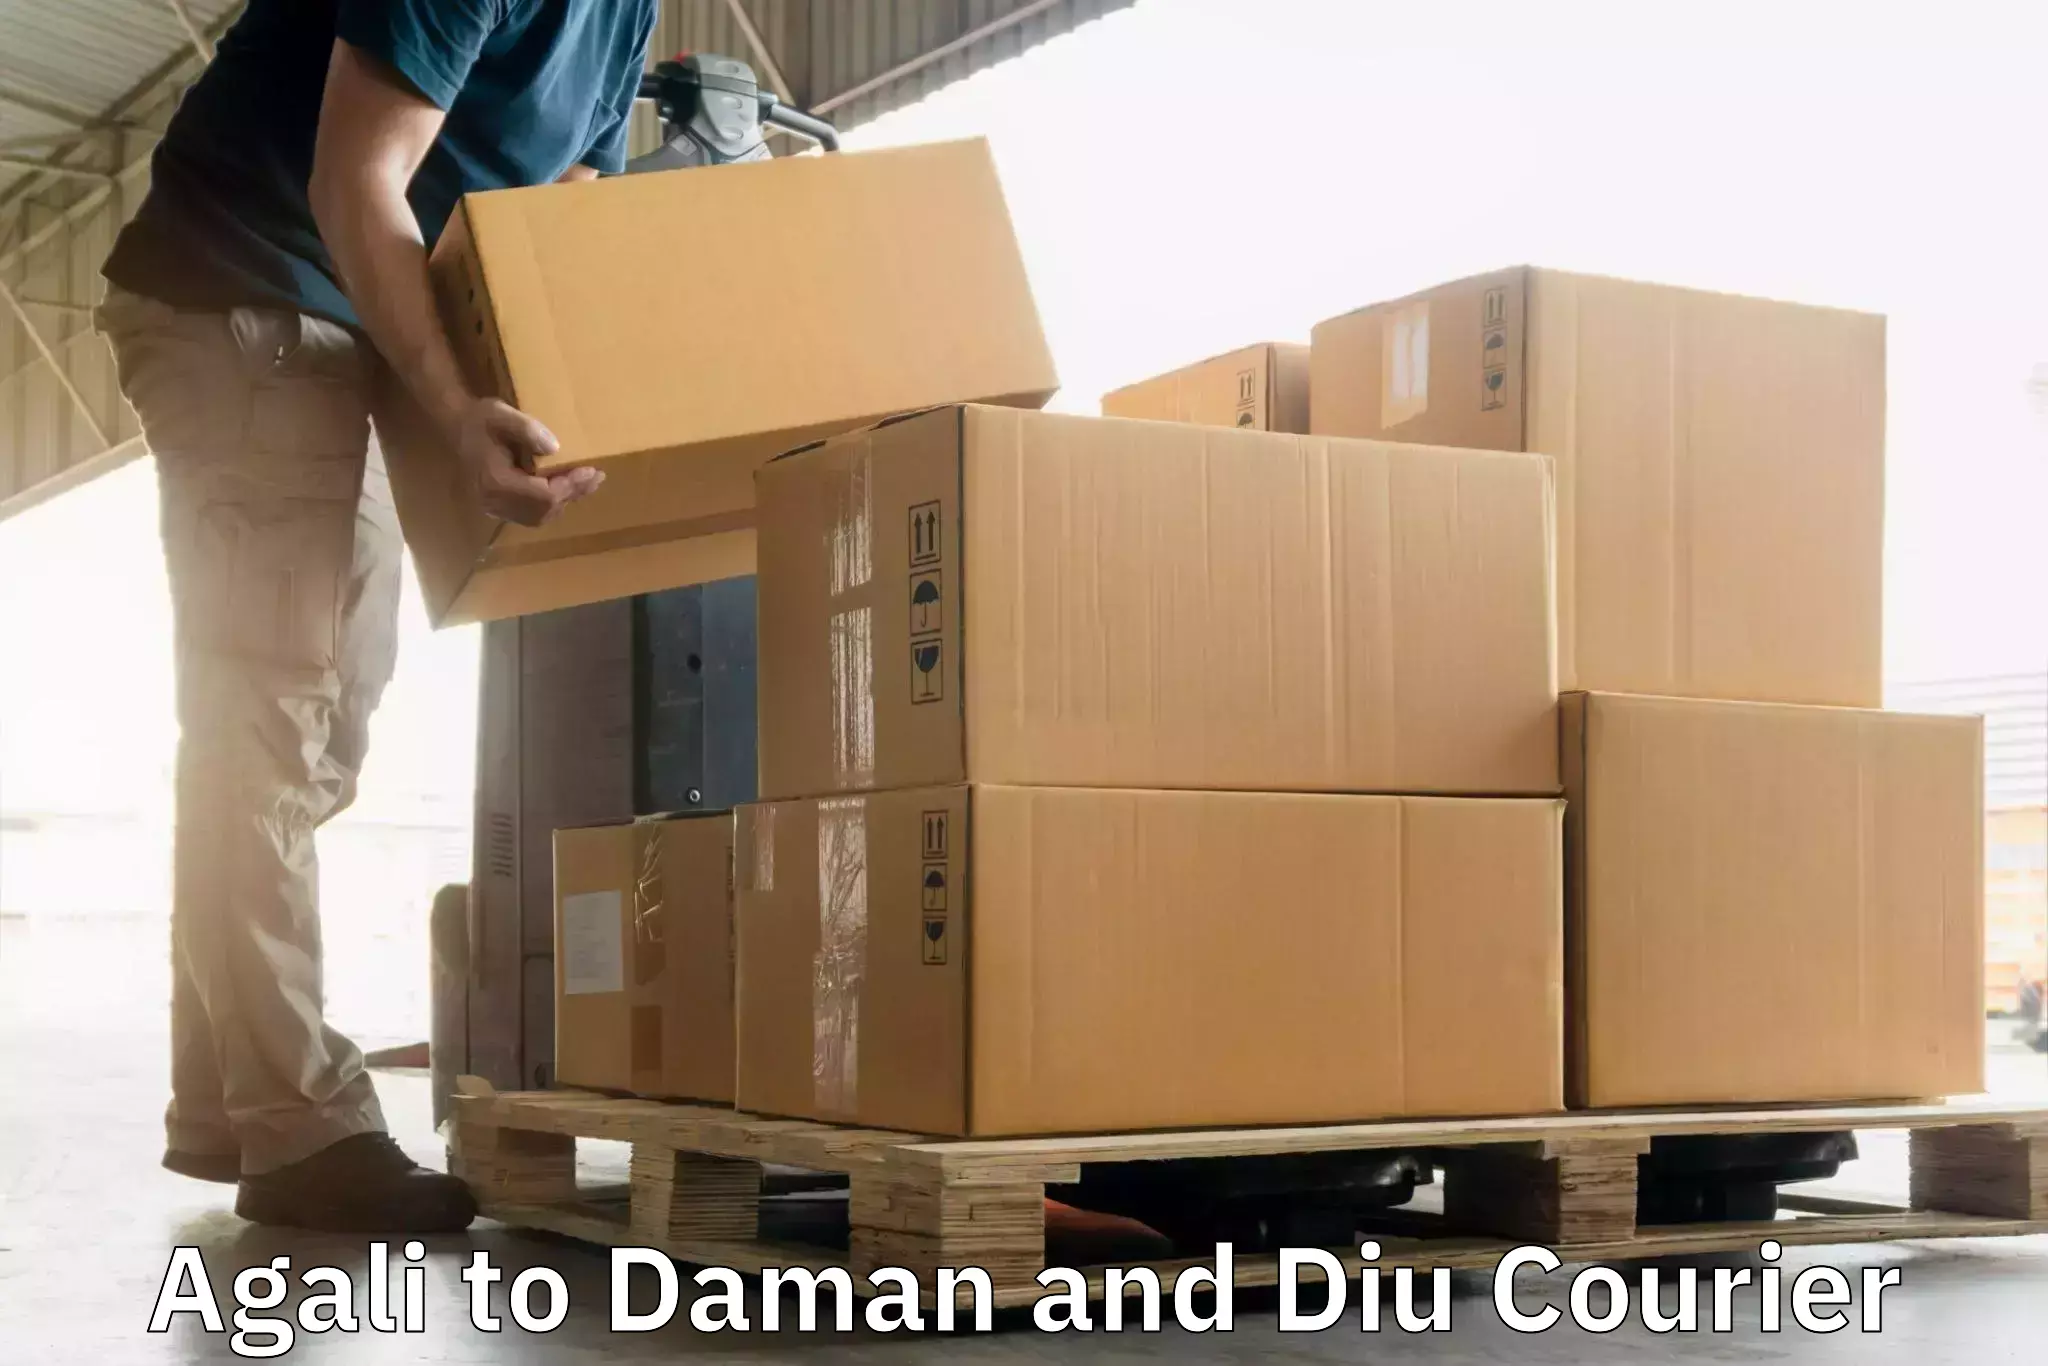 Sustainable shipping practices Agali to Daman